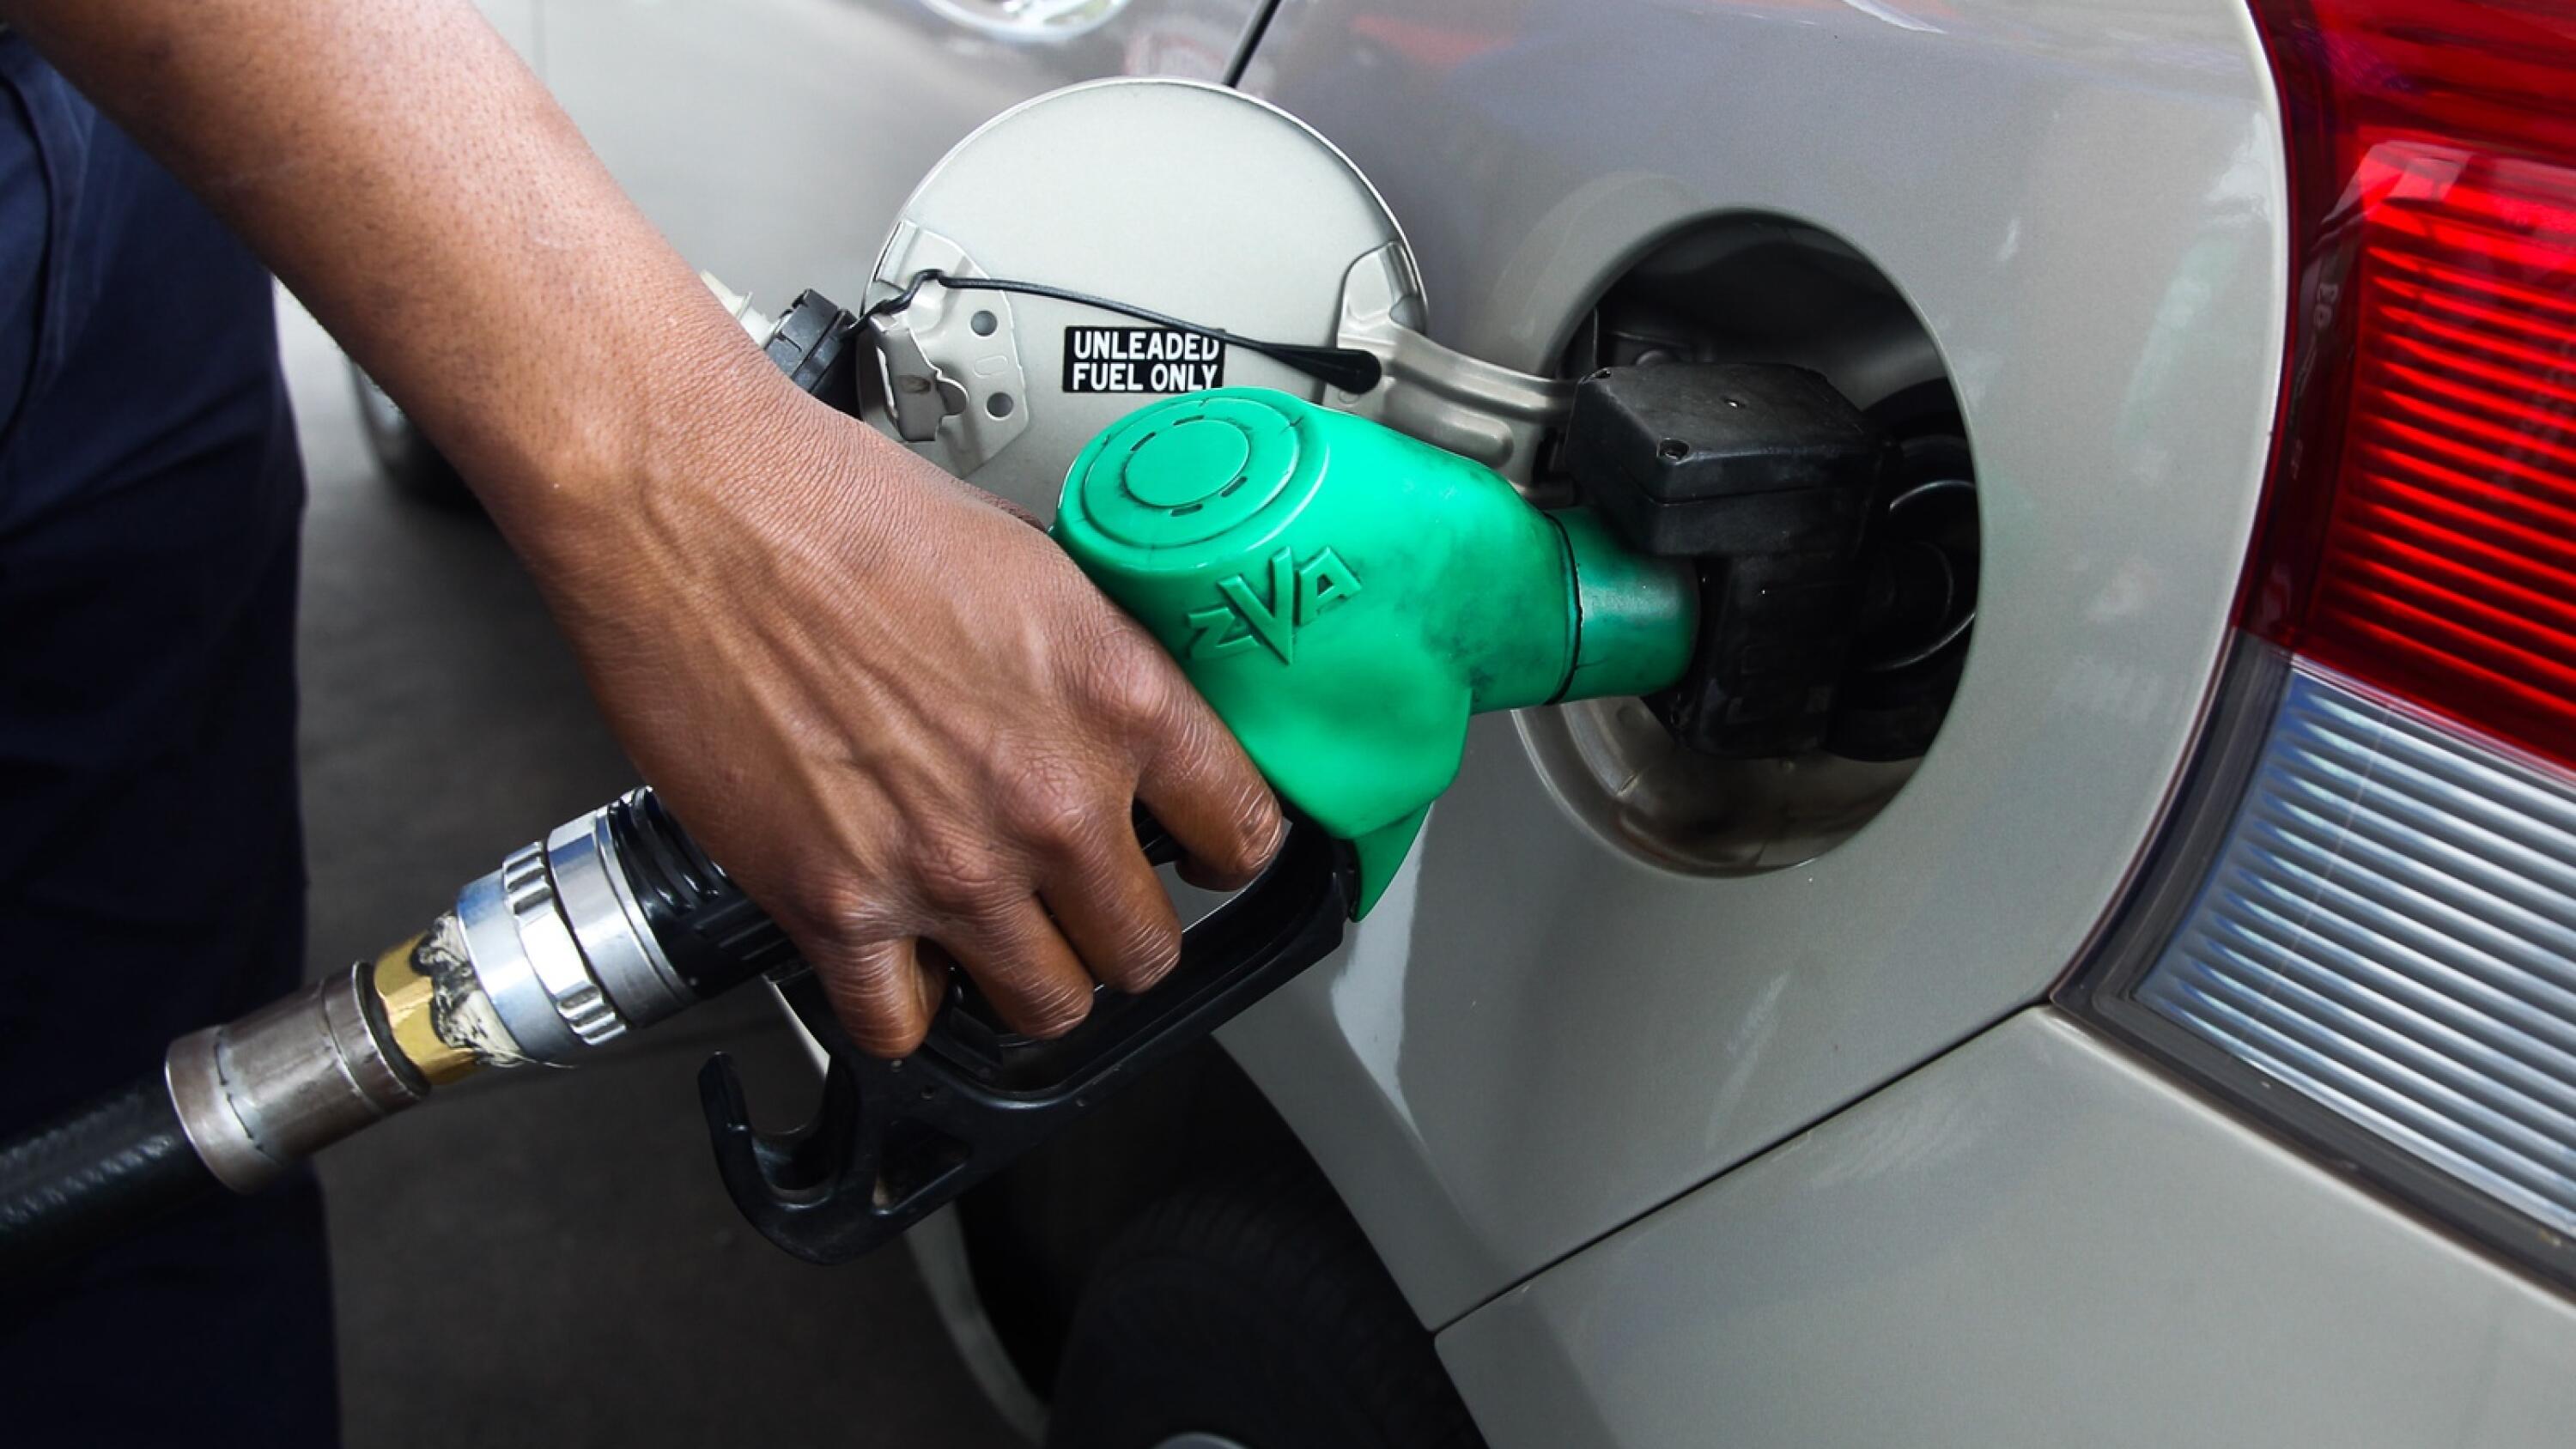 Finance Minister Enoch Godongwana said he and Energy Minister Gwede Mantashe had agreed that a review of all aspects of the fuel price was needed.